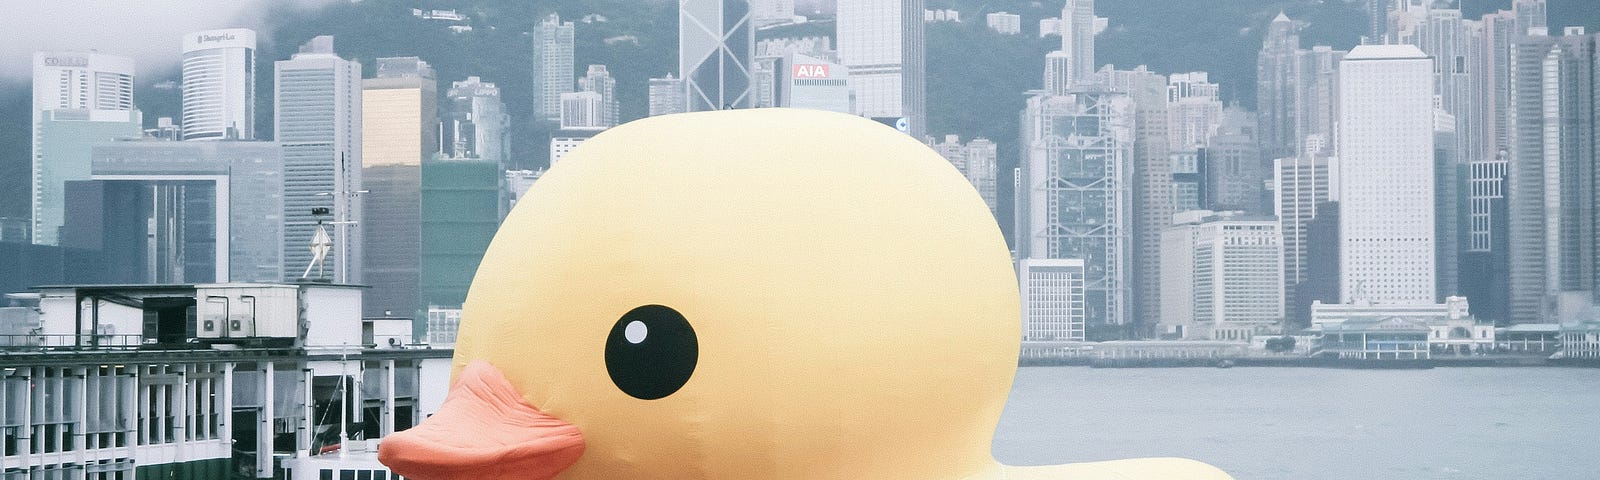 A giant rubber duck in a dock.